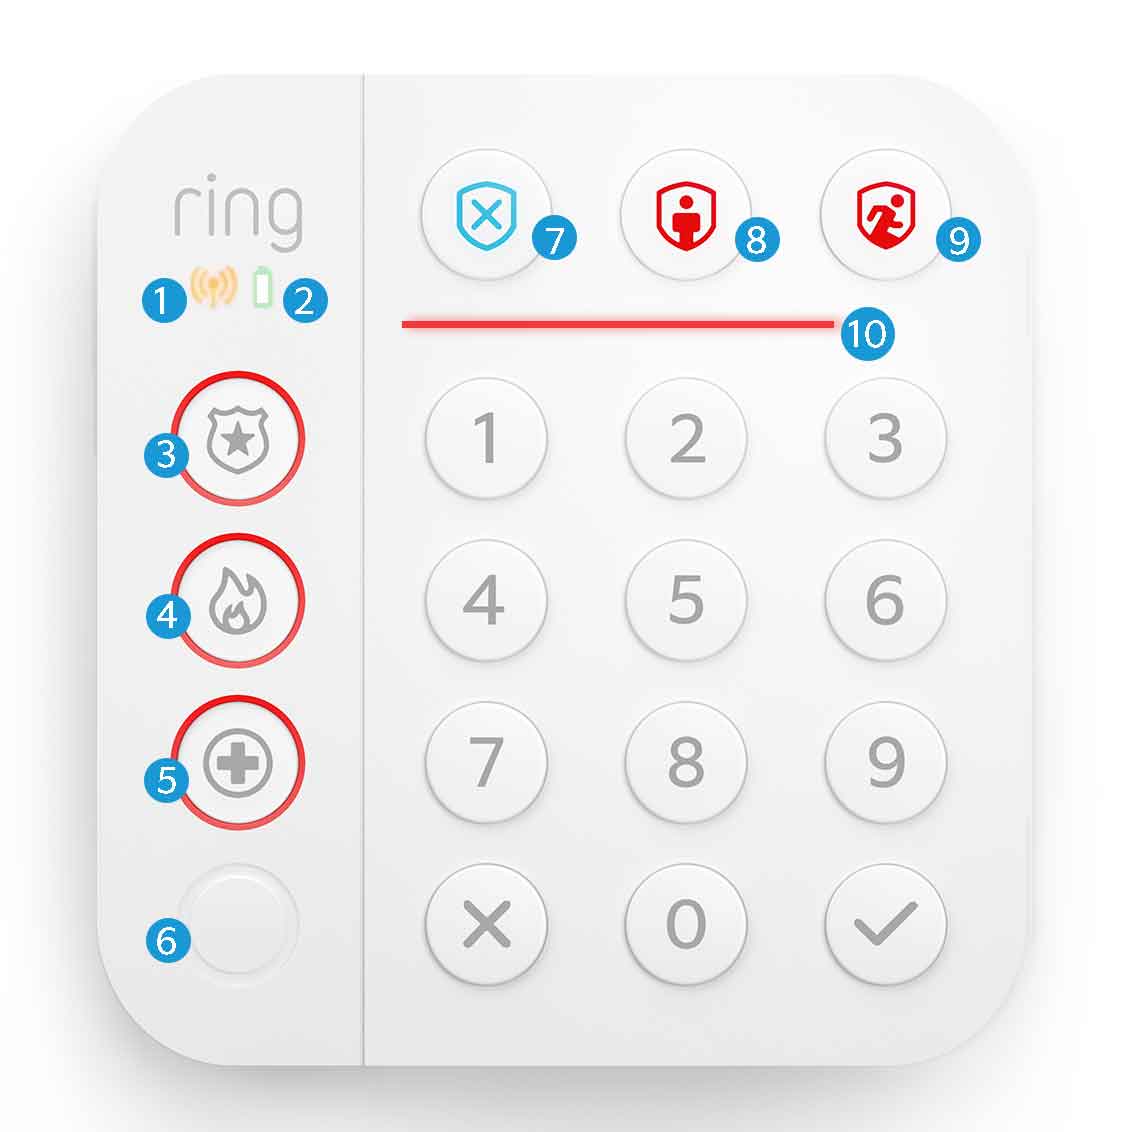 2019_device_keypad_front_wall_2048px-illustrated-for-help-center.jpg